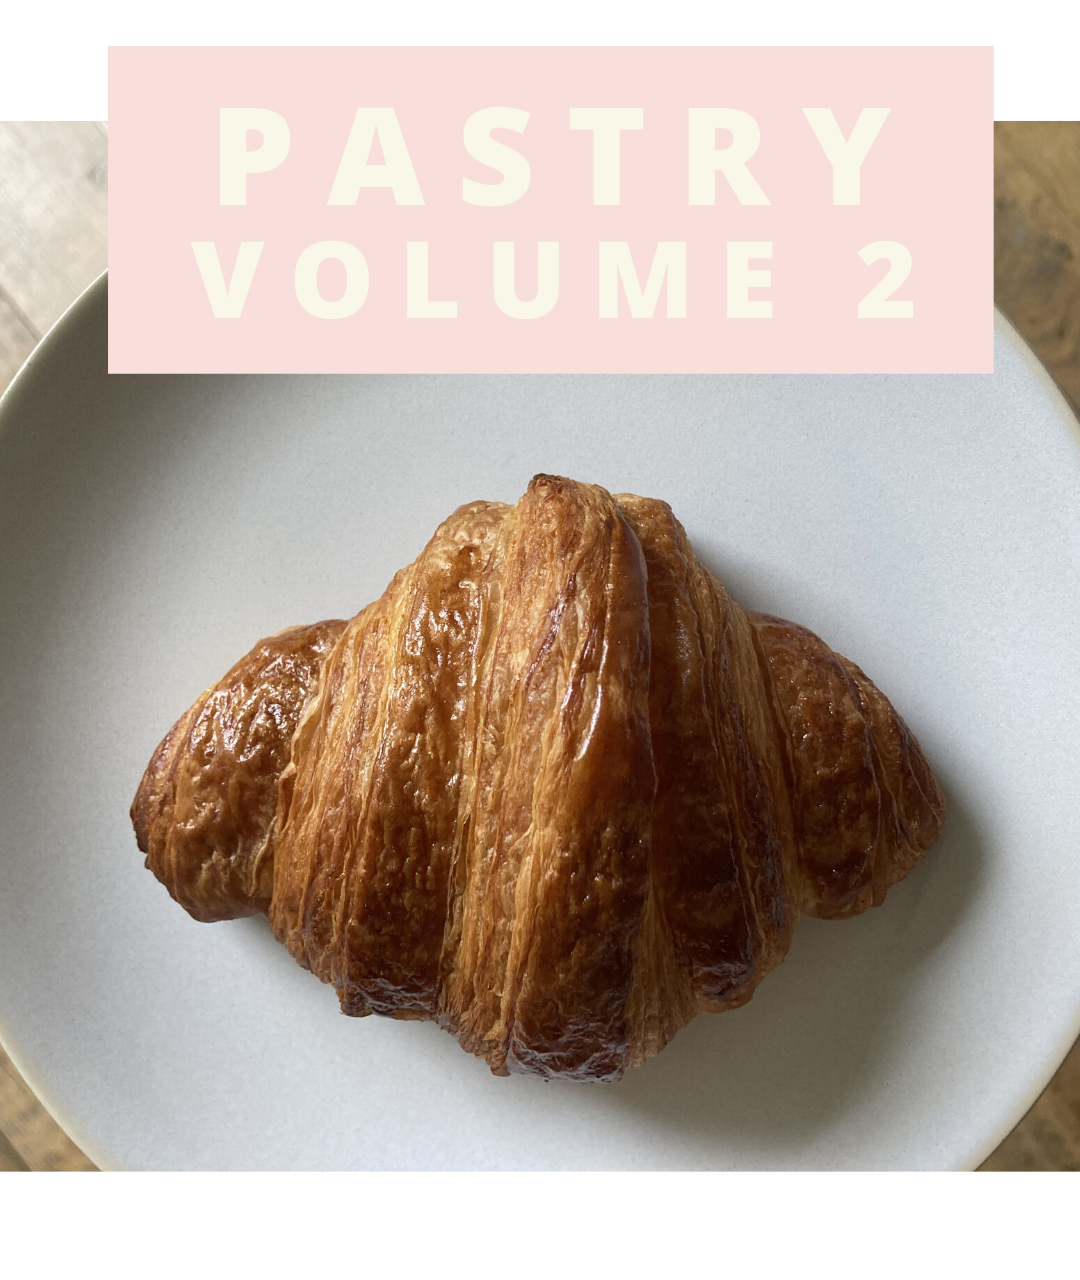 Click on the croissant to find out more